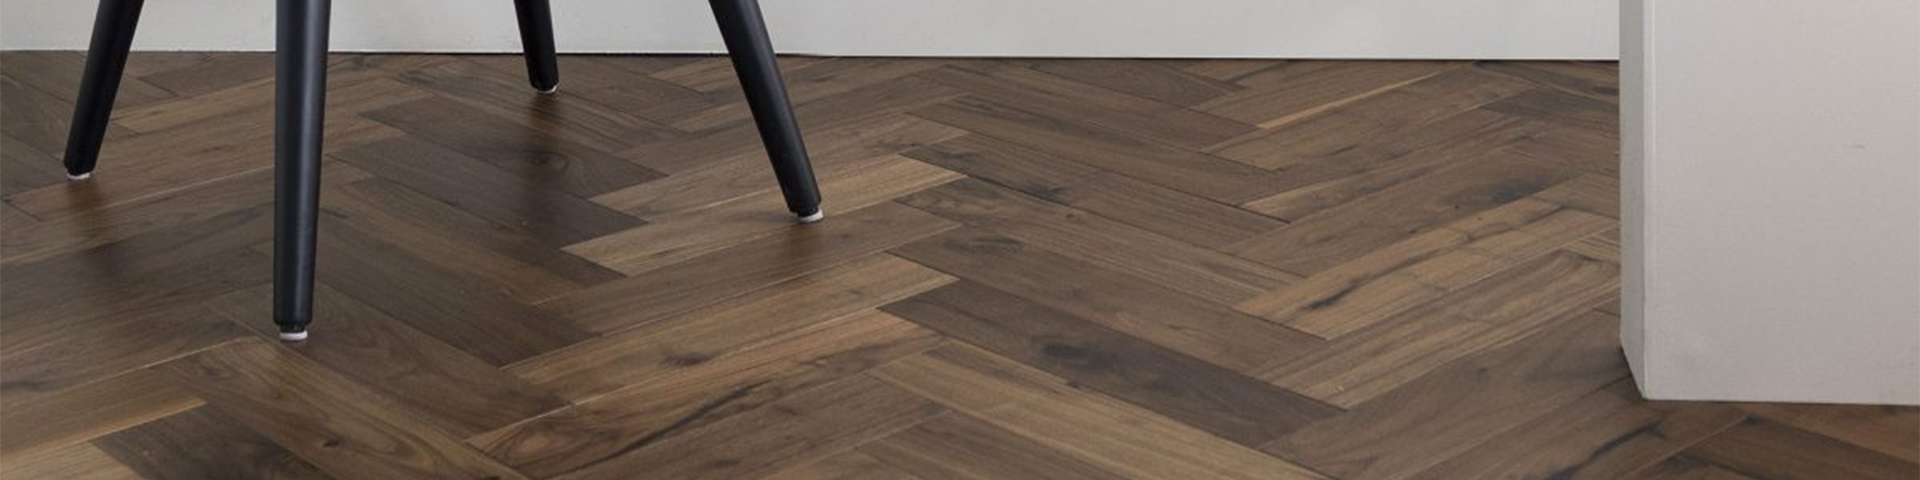 What Are The Benefits Of Solid Wood Flooring?